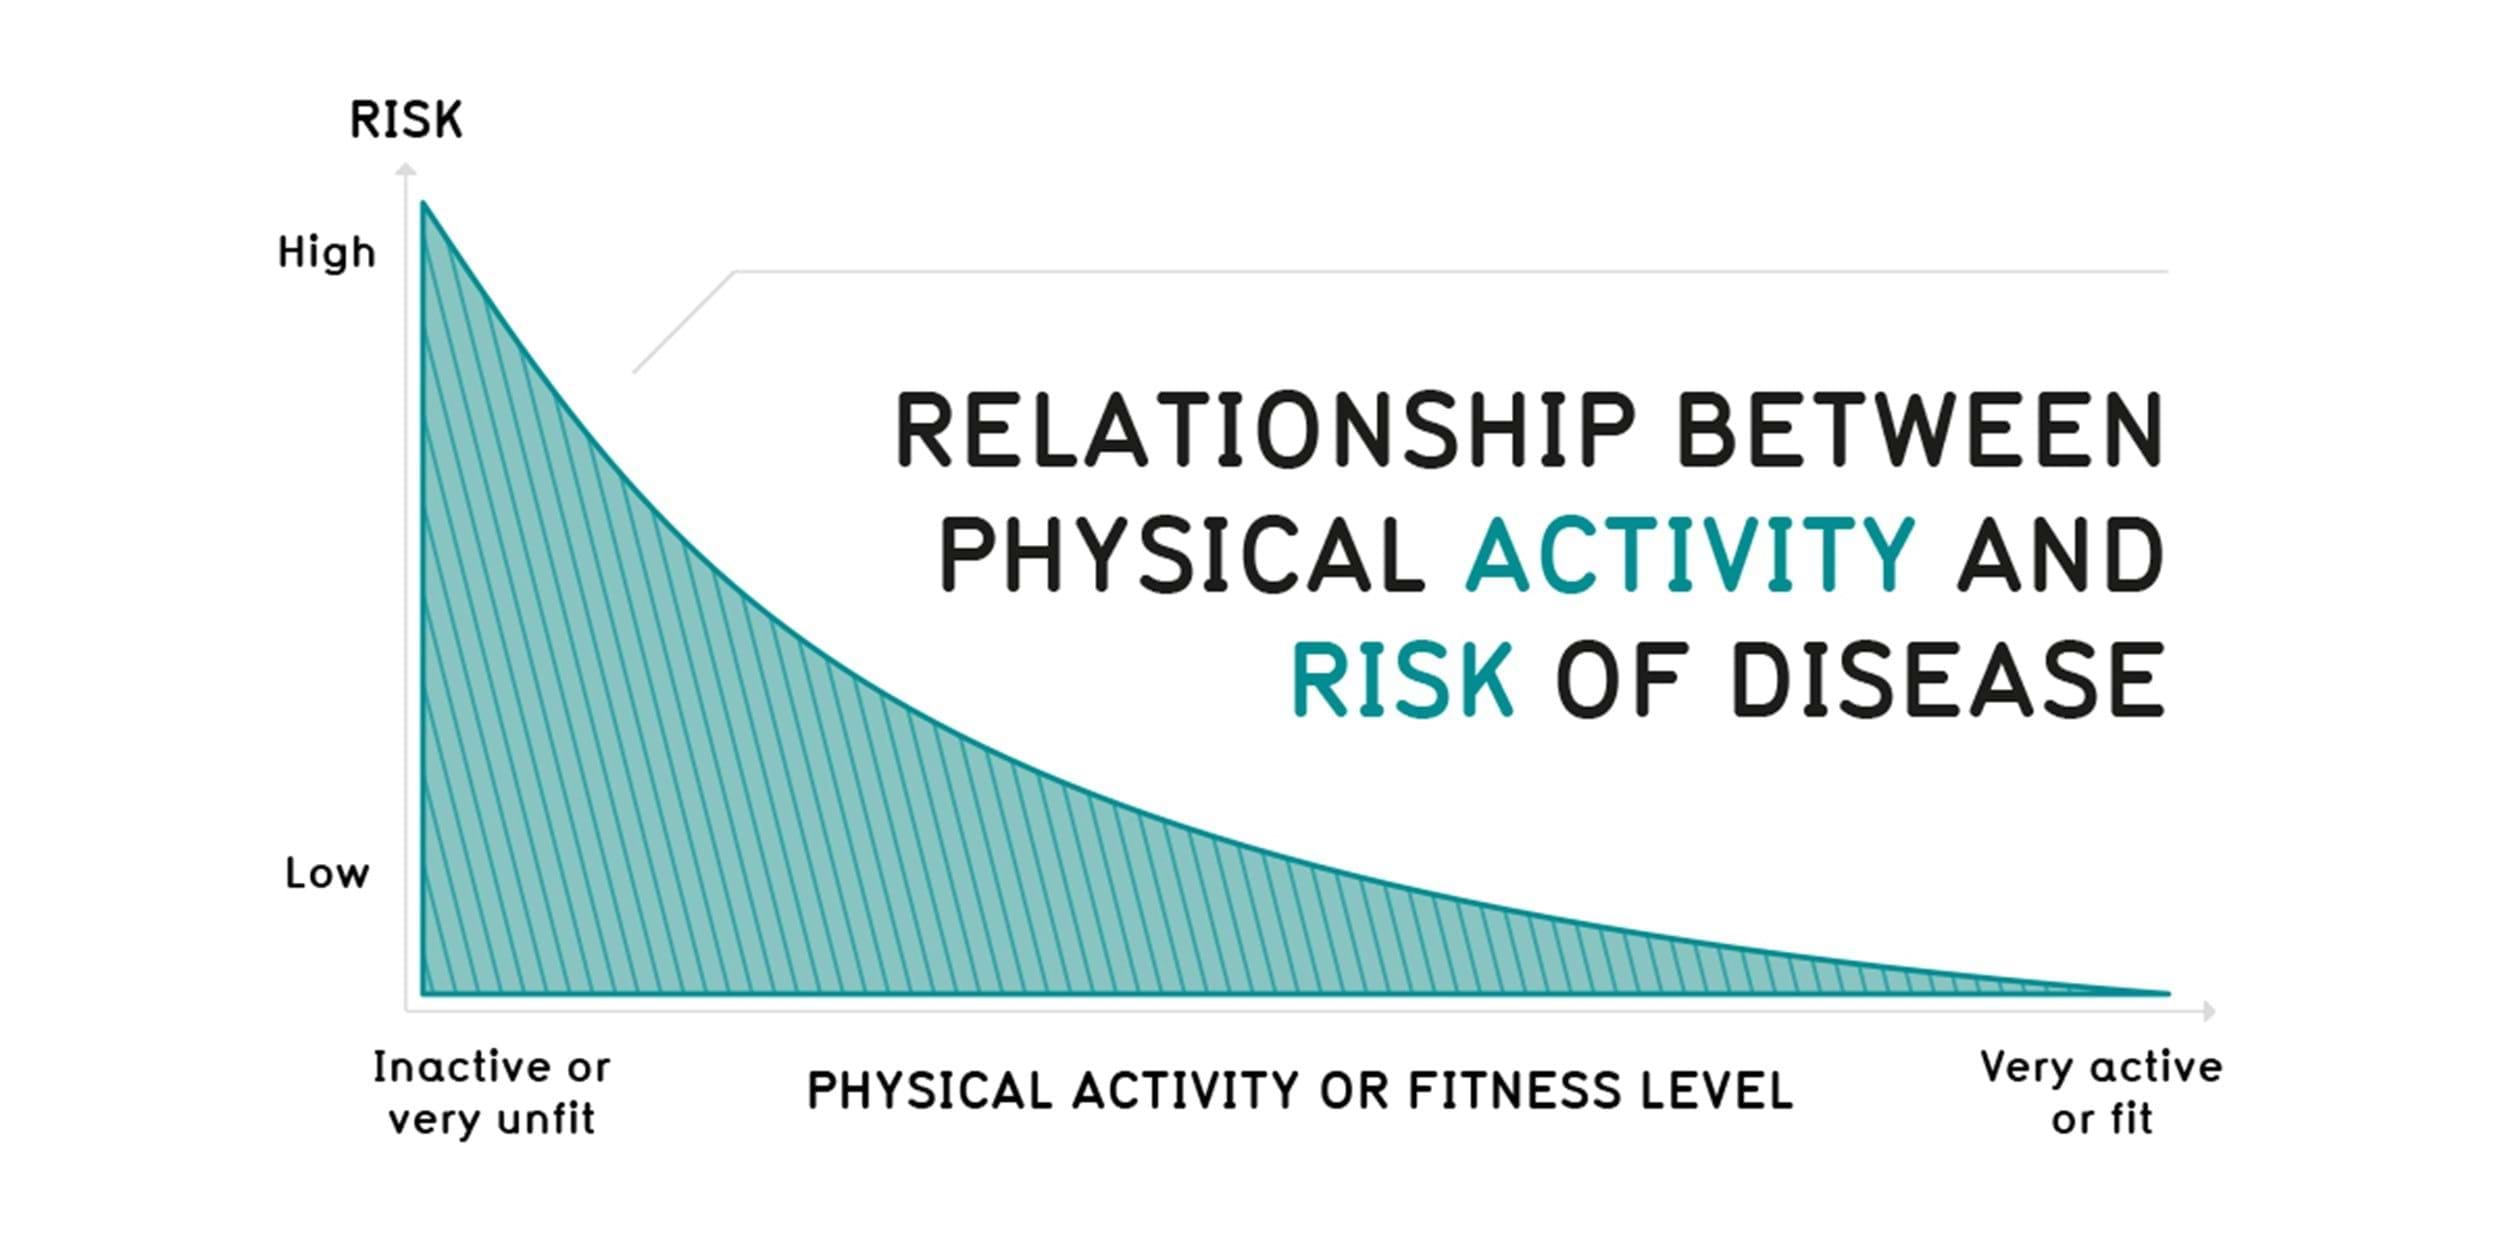 Relationship between physical activity and risk of disease